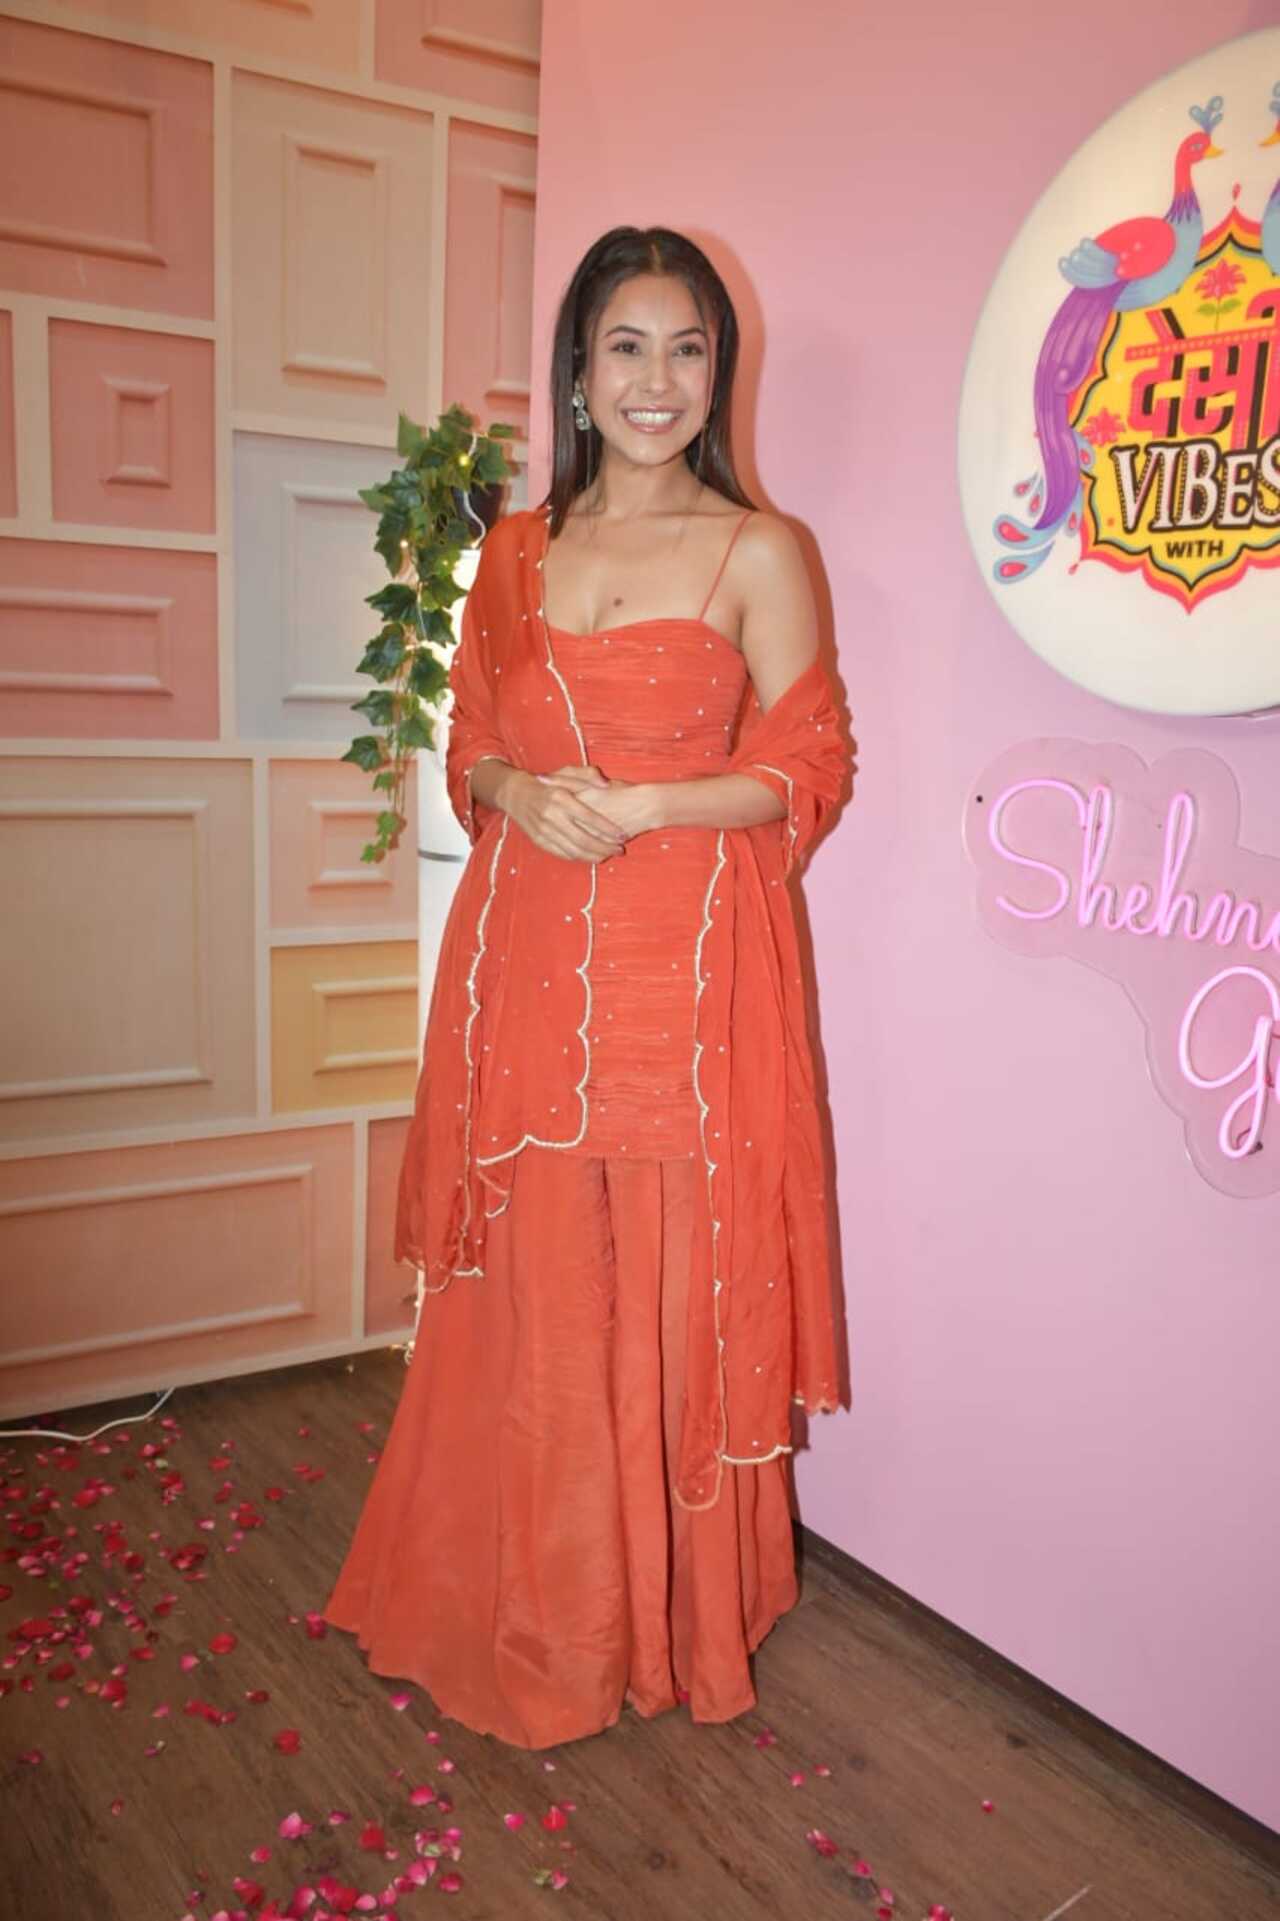 Shehnaaz Gill returned to the sets of her chat show, Desi Vibes With Shehnaaz Gill